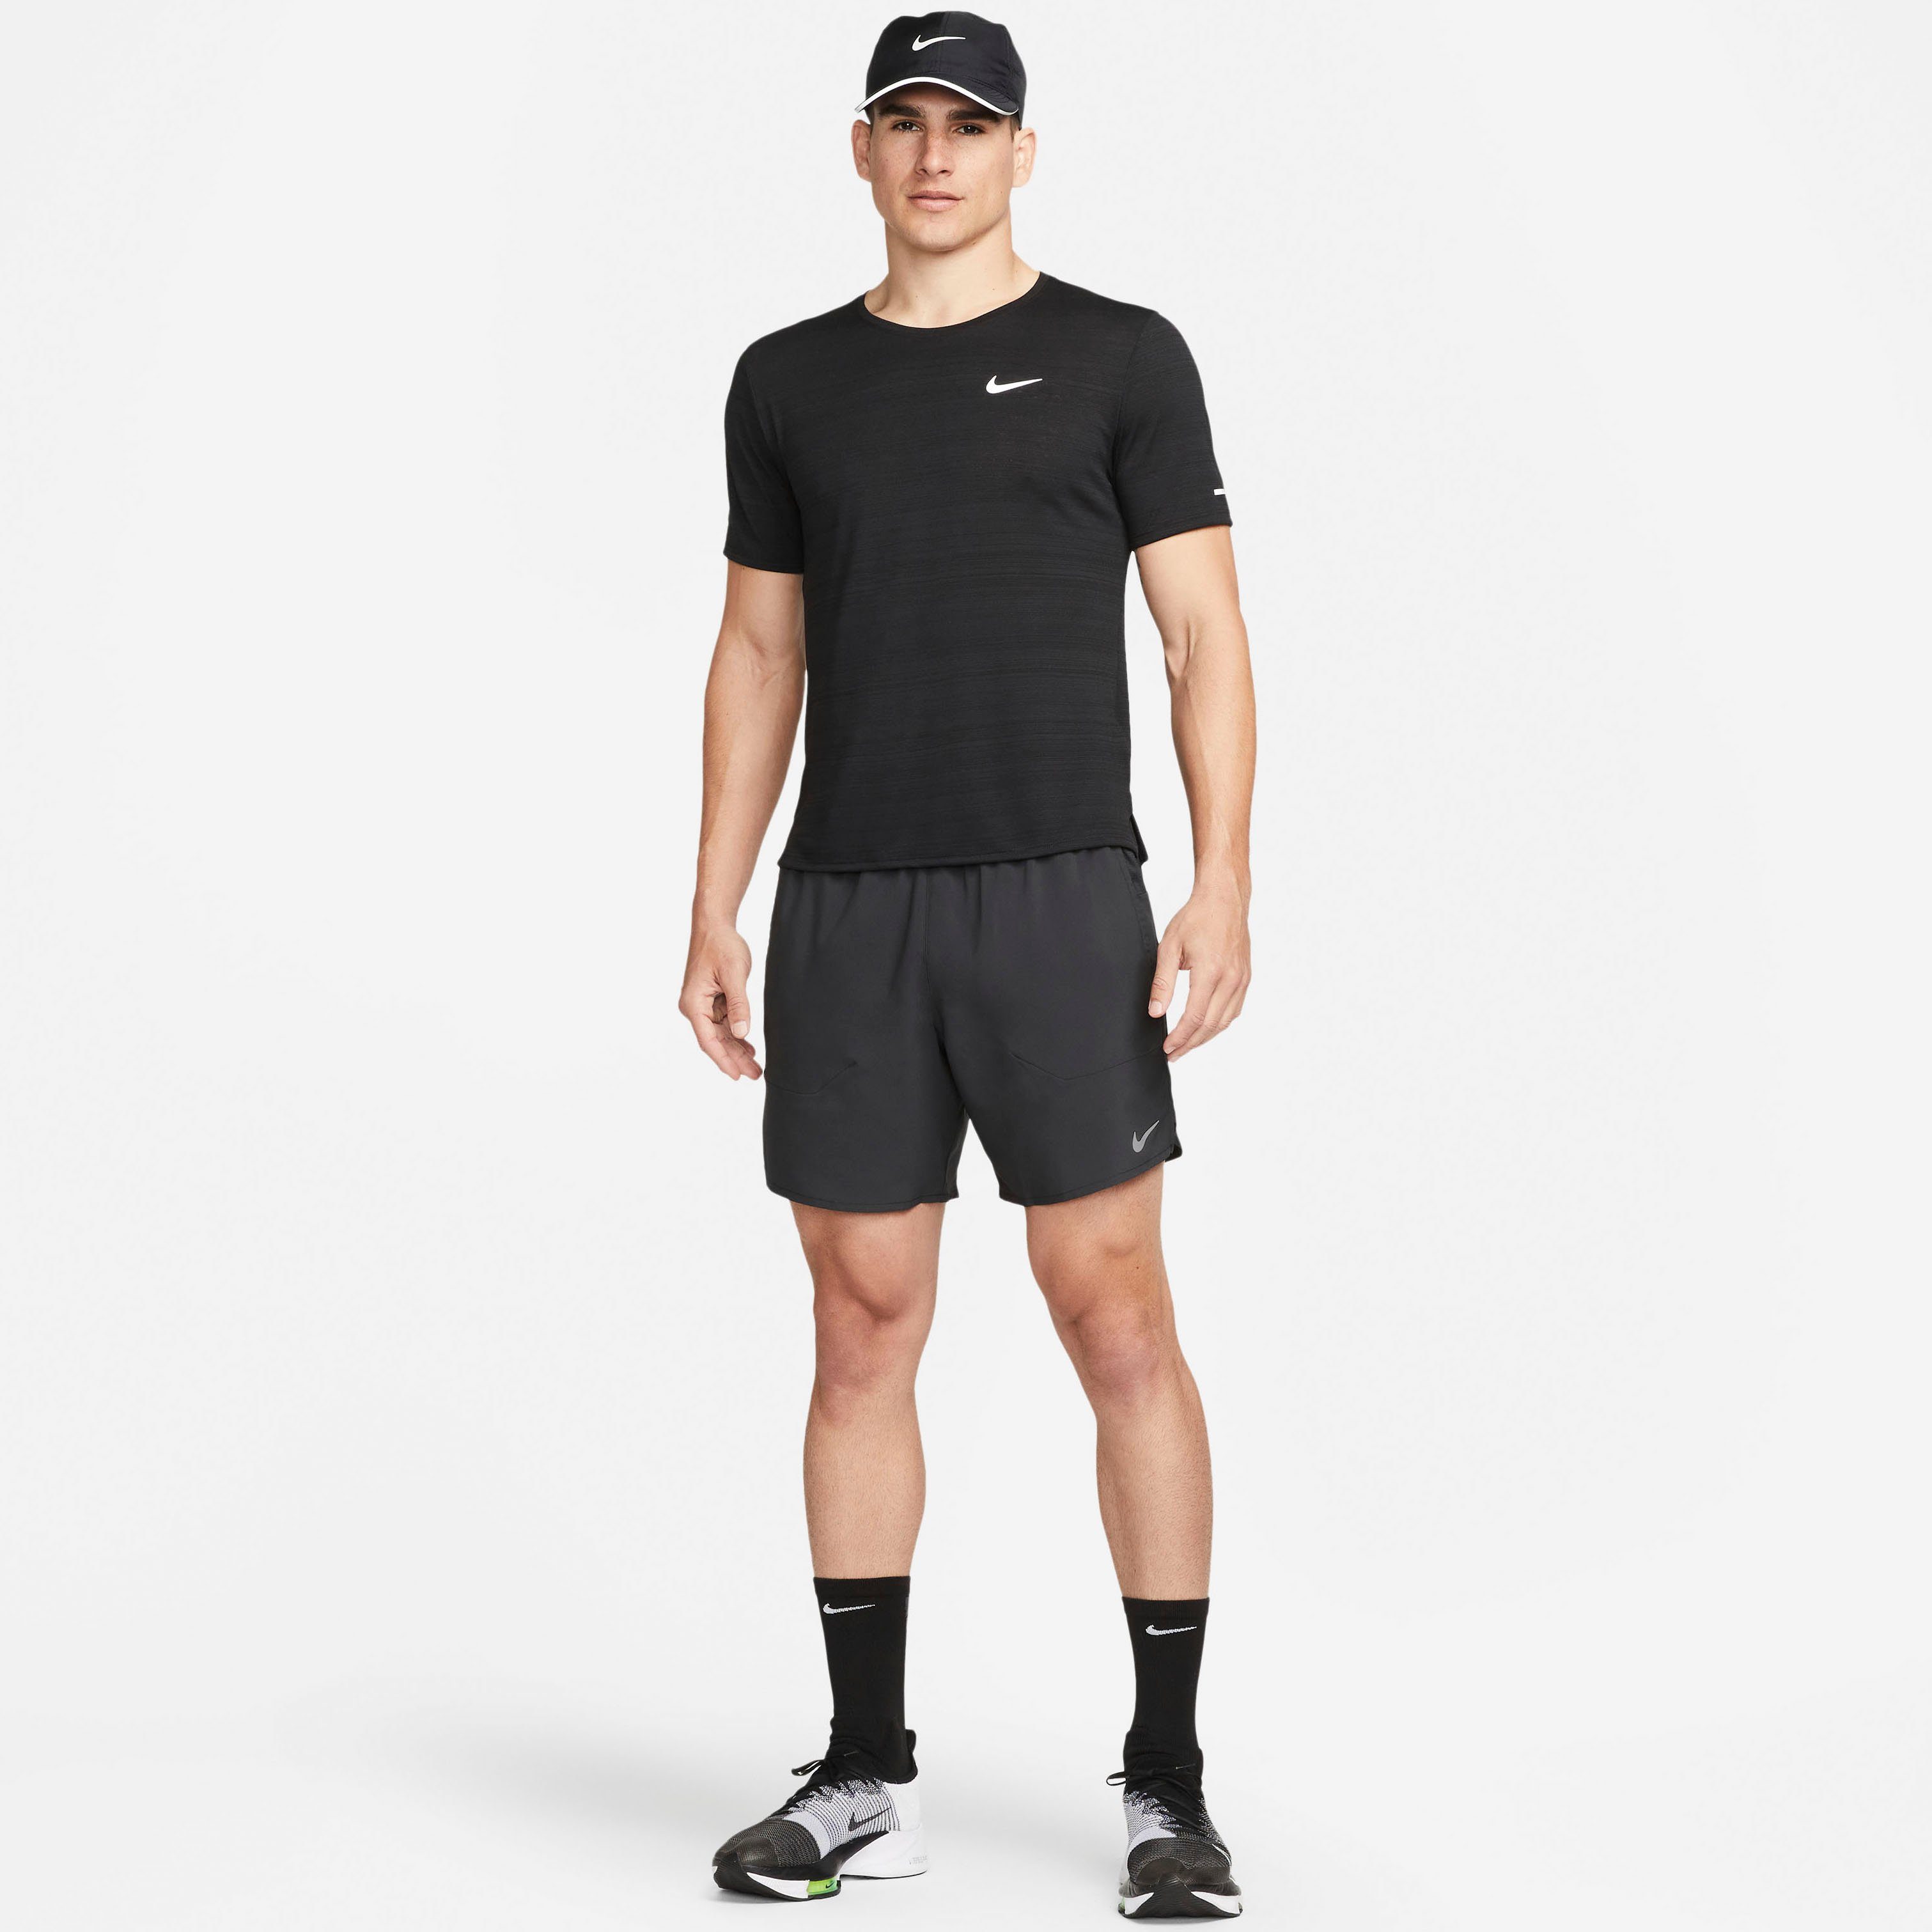 Dri-FIT " Brief-Lined Nike Shorts Laufshorts Running Men's Stride